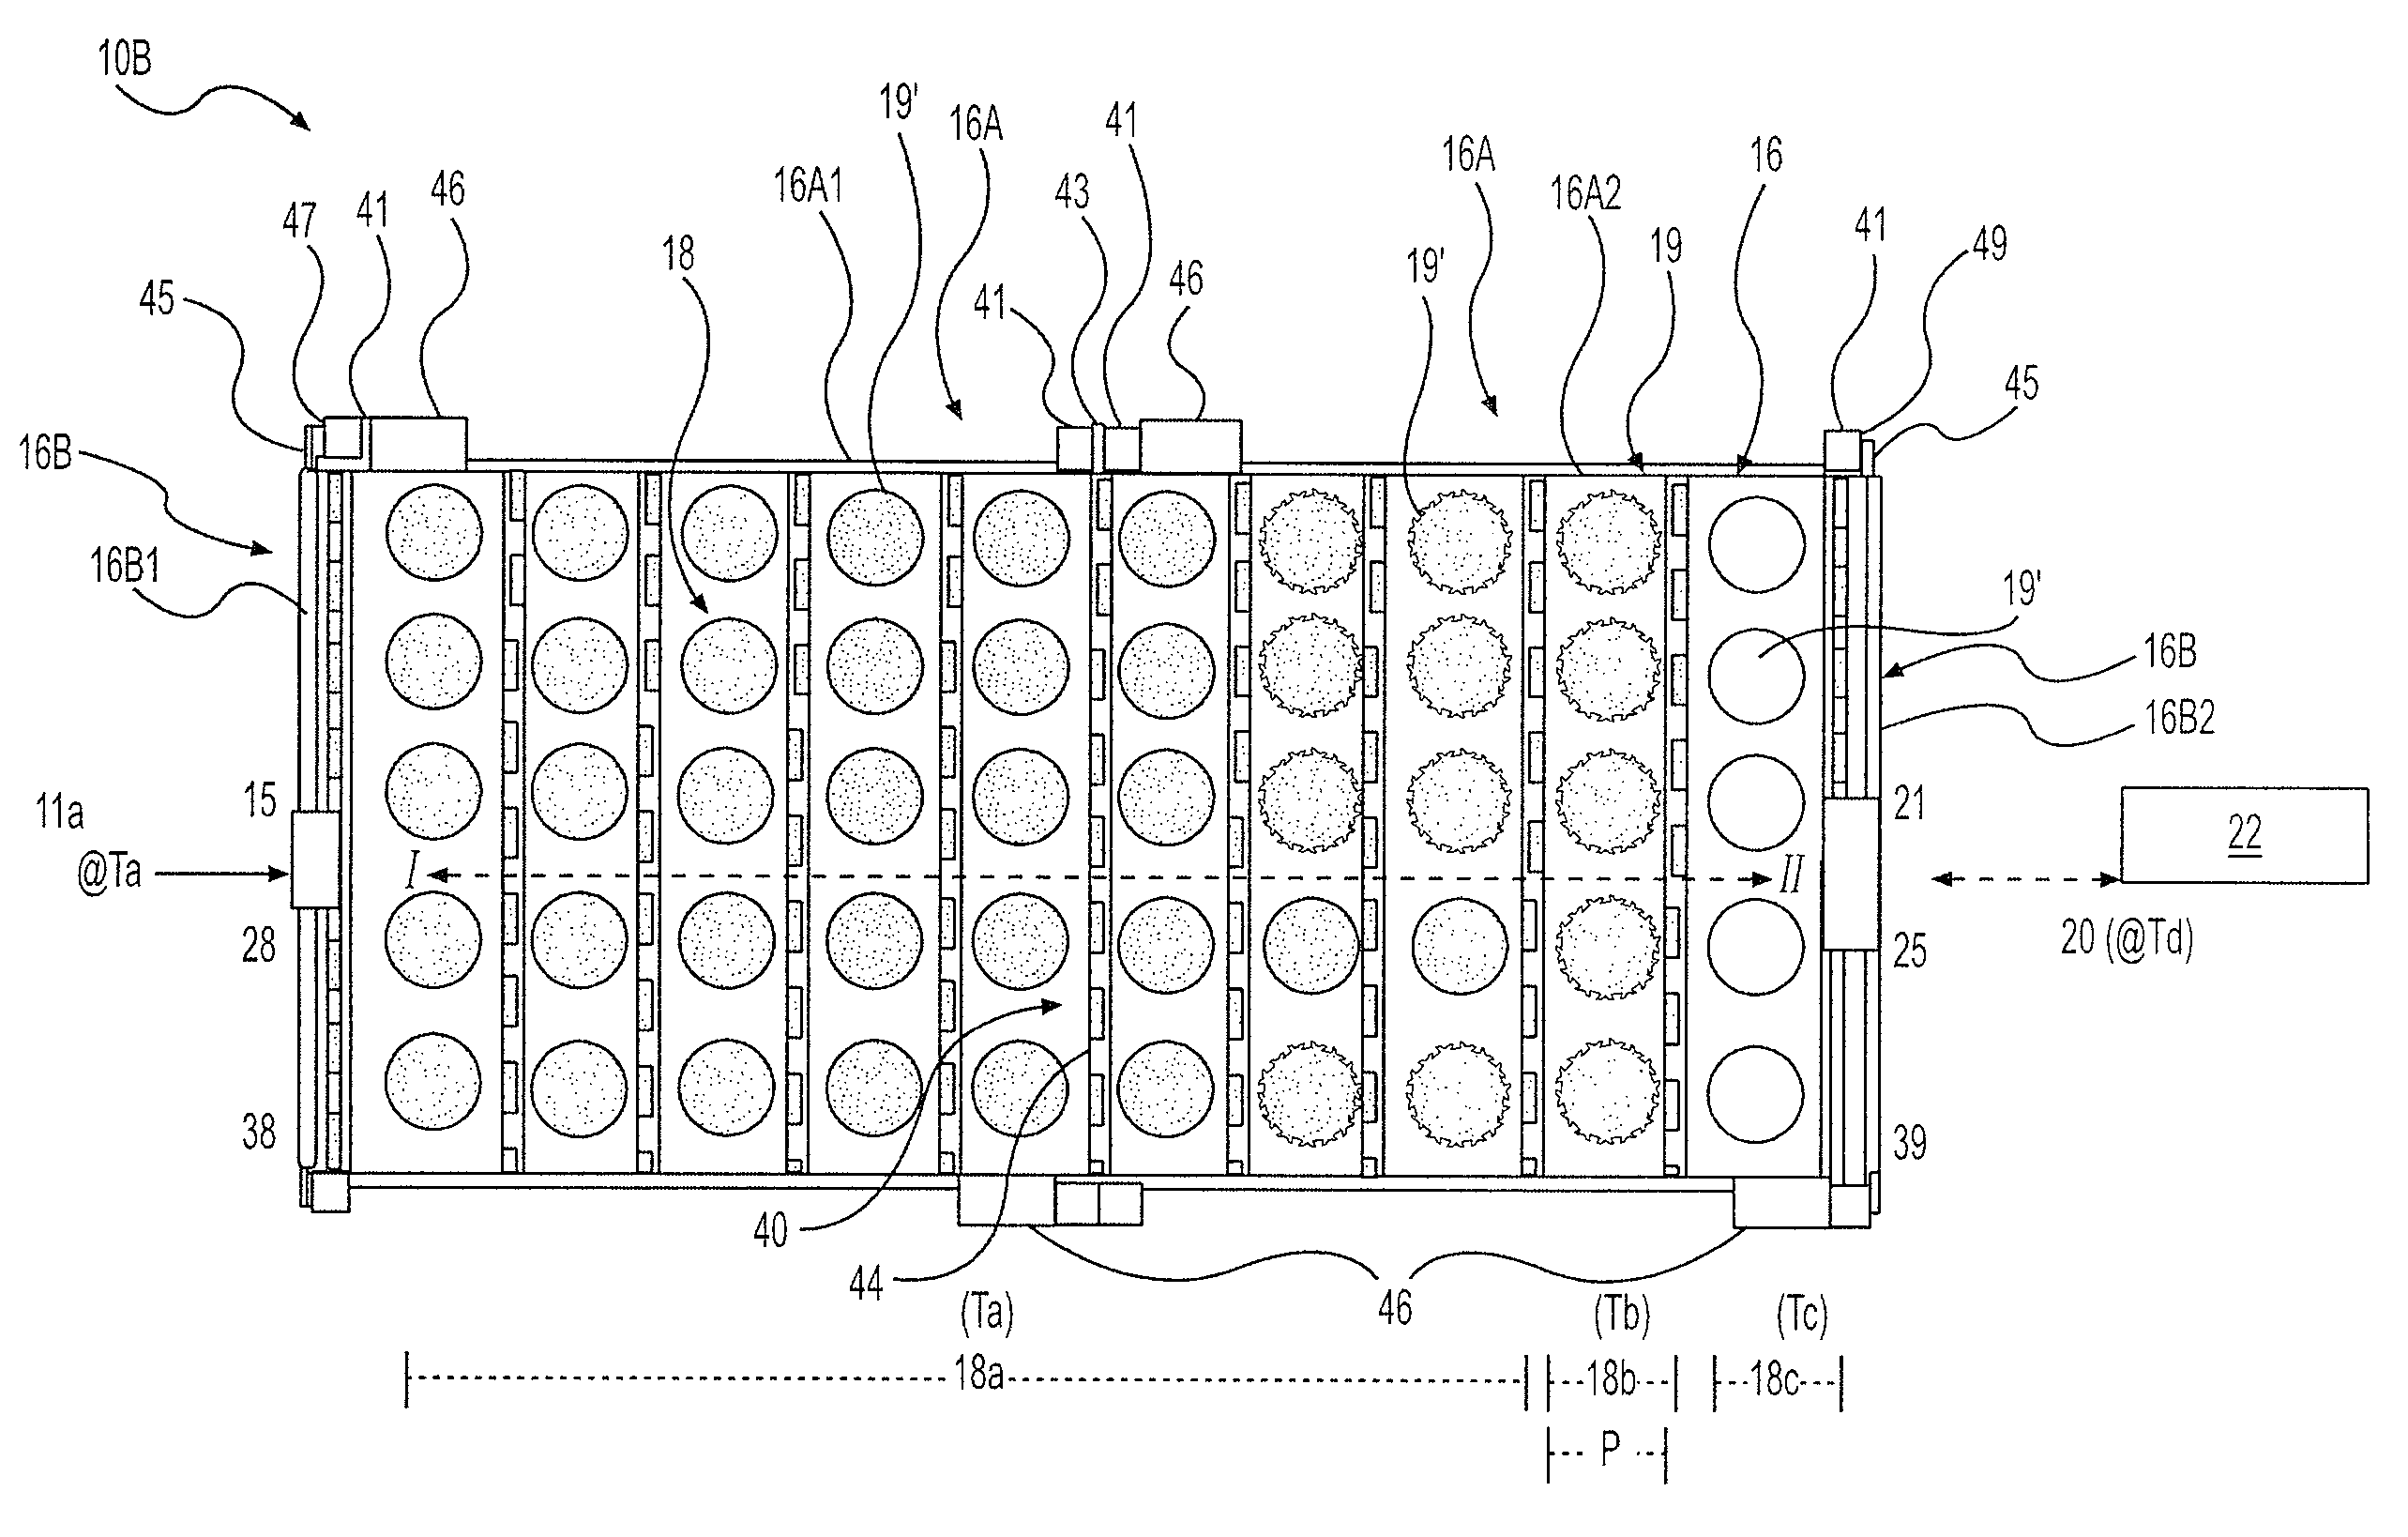 Apparatus and method for storing heat energy